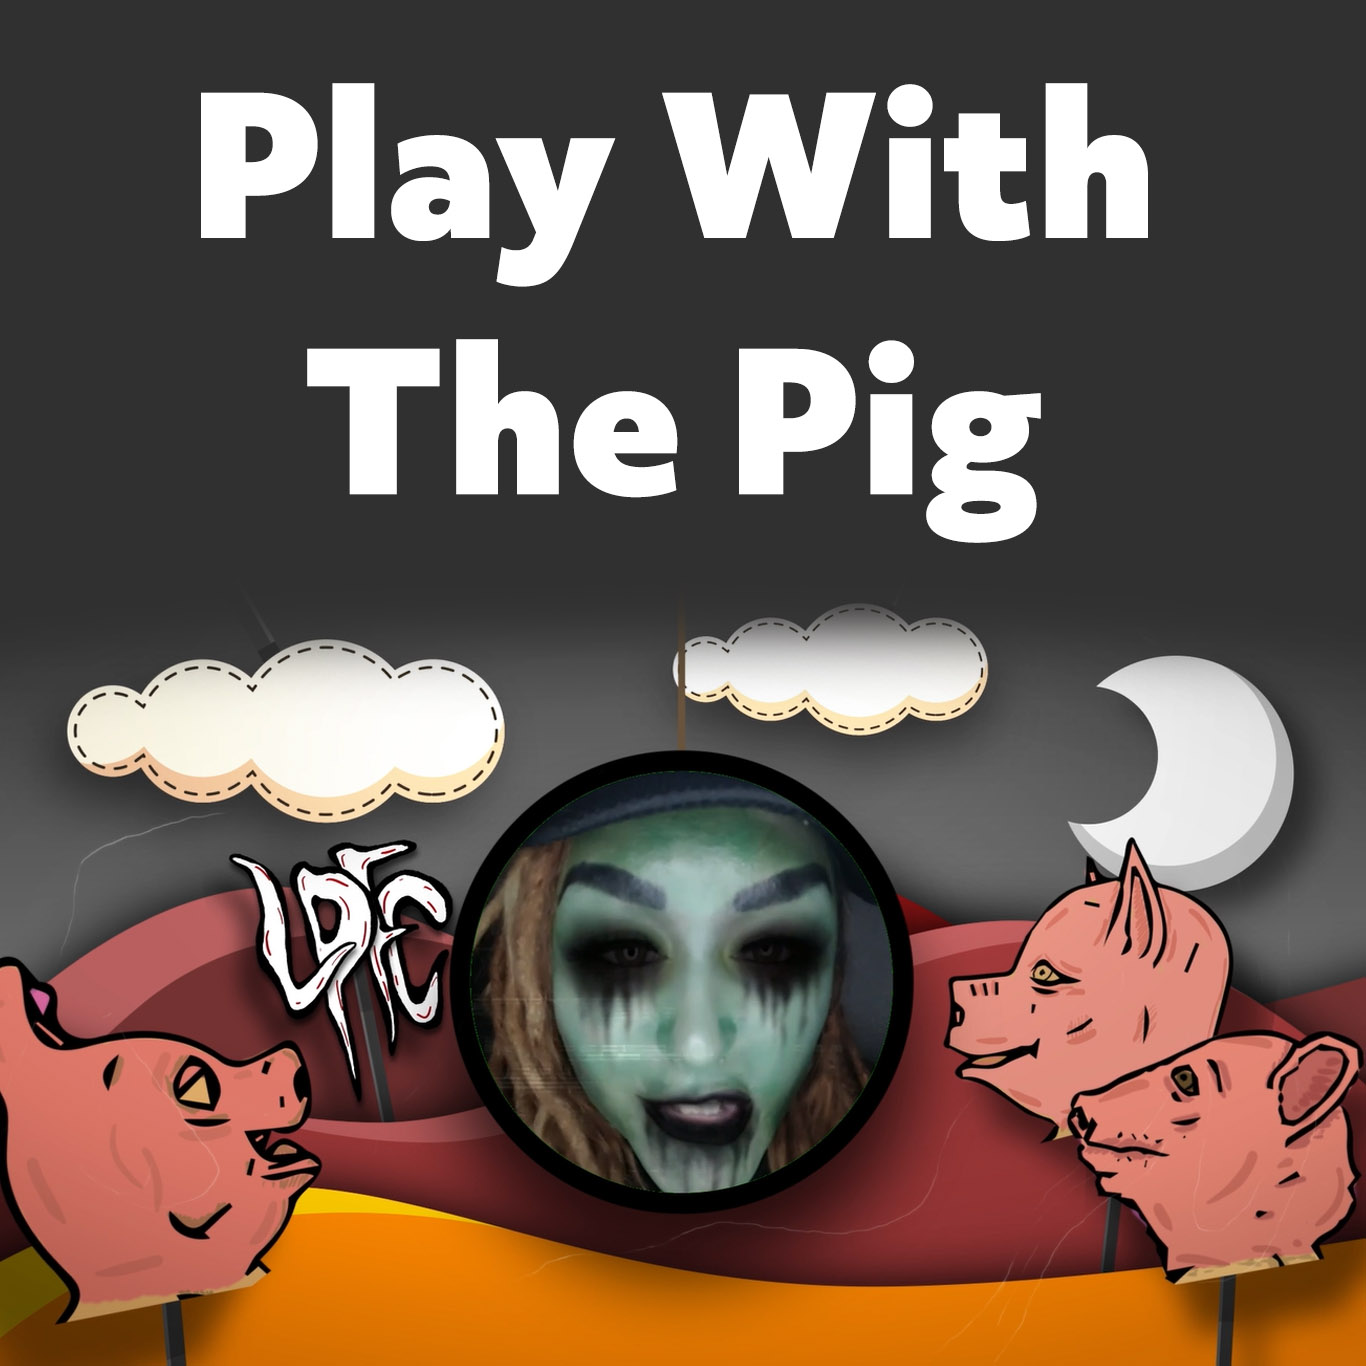 Longpig and the Femcans Play With The Pig